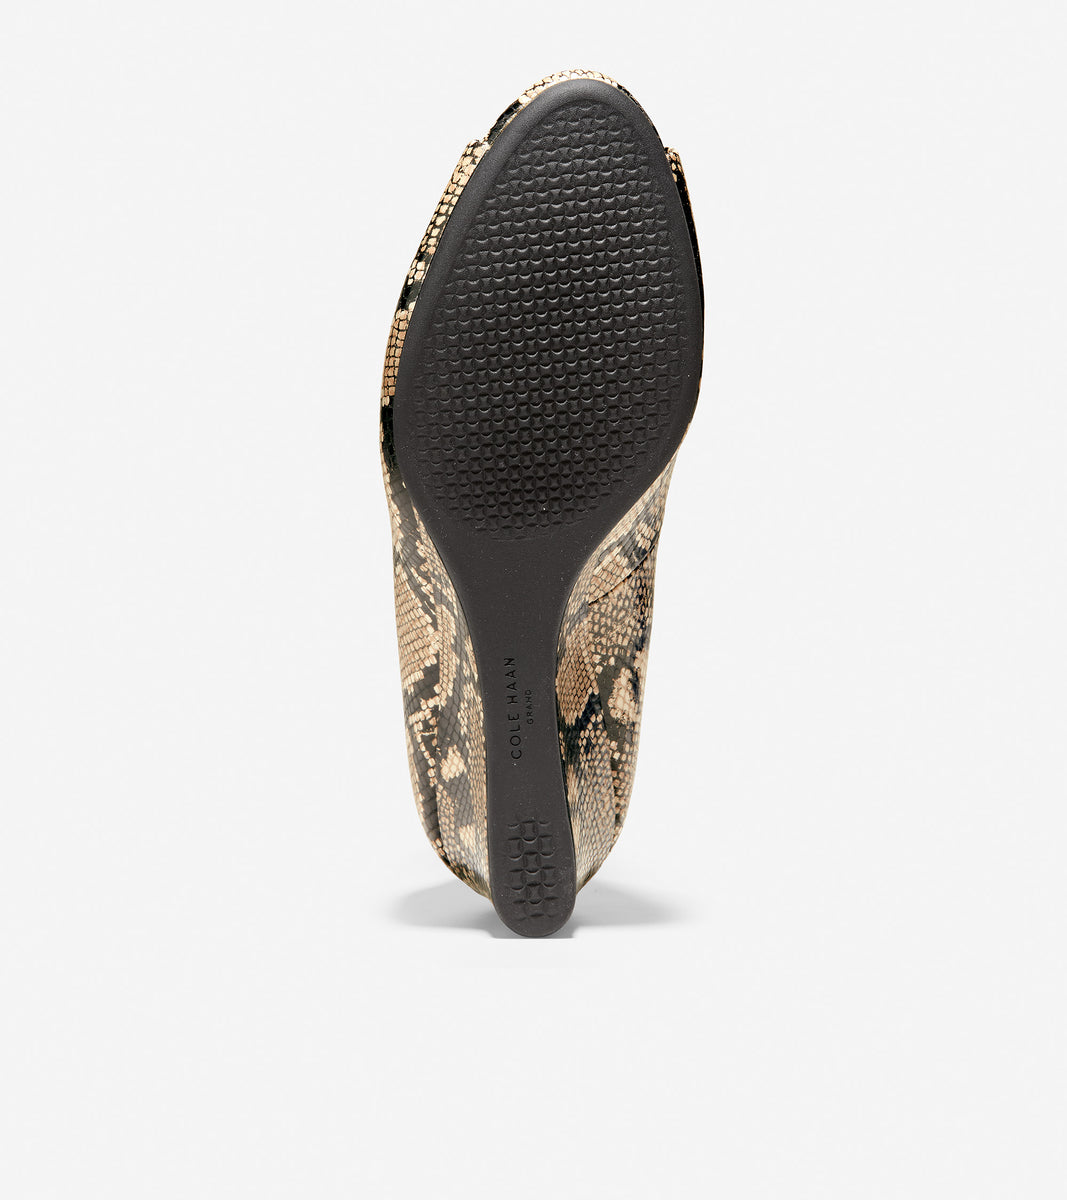 ColeHaan-Grand Ambition Open Toe Wedge-w19413-Amphora Snake Print Leather